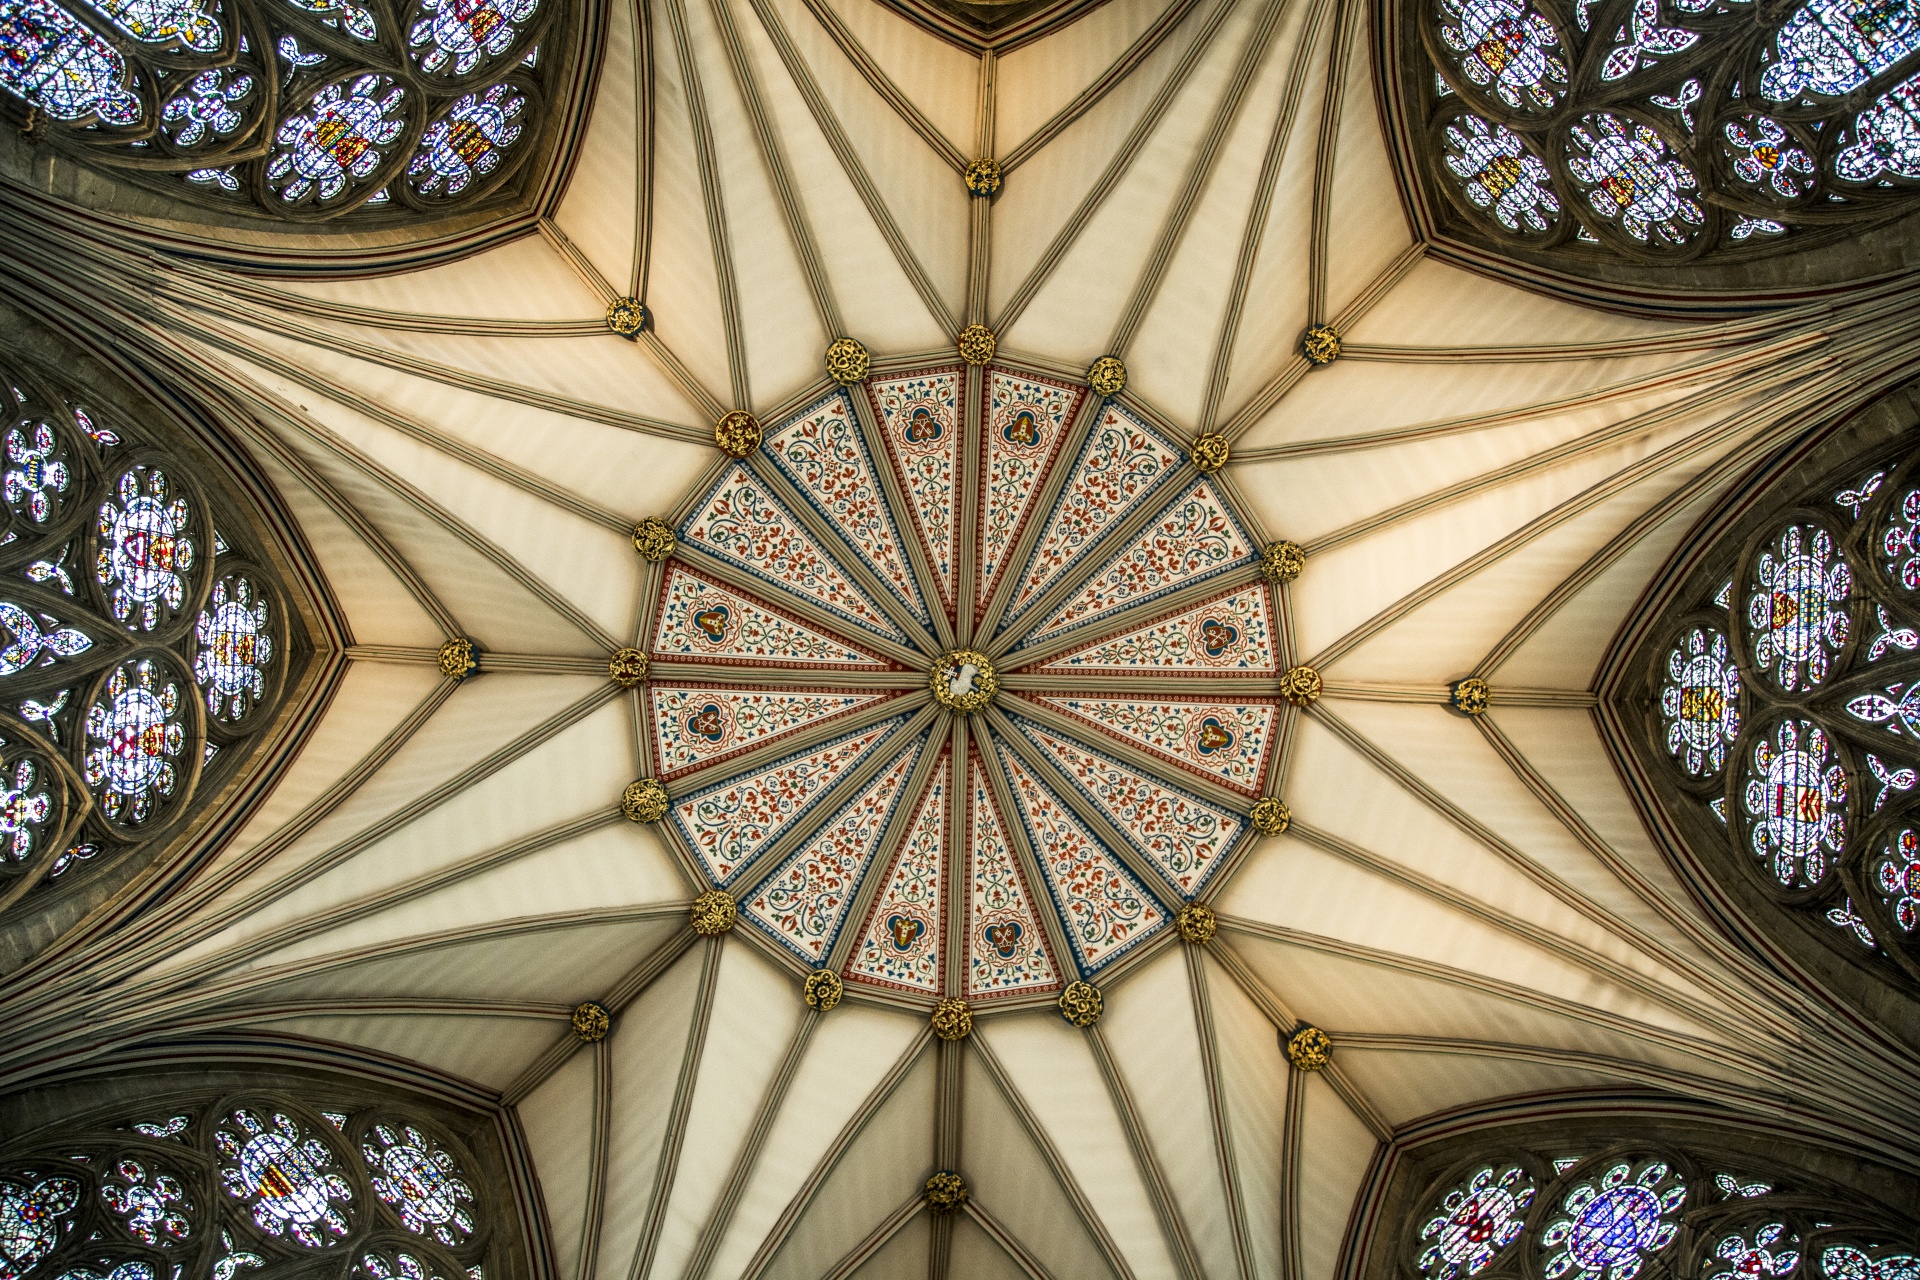 The Chapter House is one of York Minster’s architectural gems and its vaulted roof is the earliest example of its kind to use a revolutionary engineering technique. The octagonal space was built between over around 20 years from the 1260s to 1280s